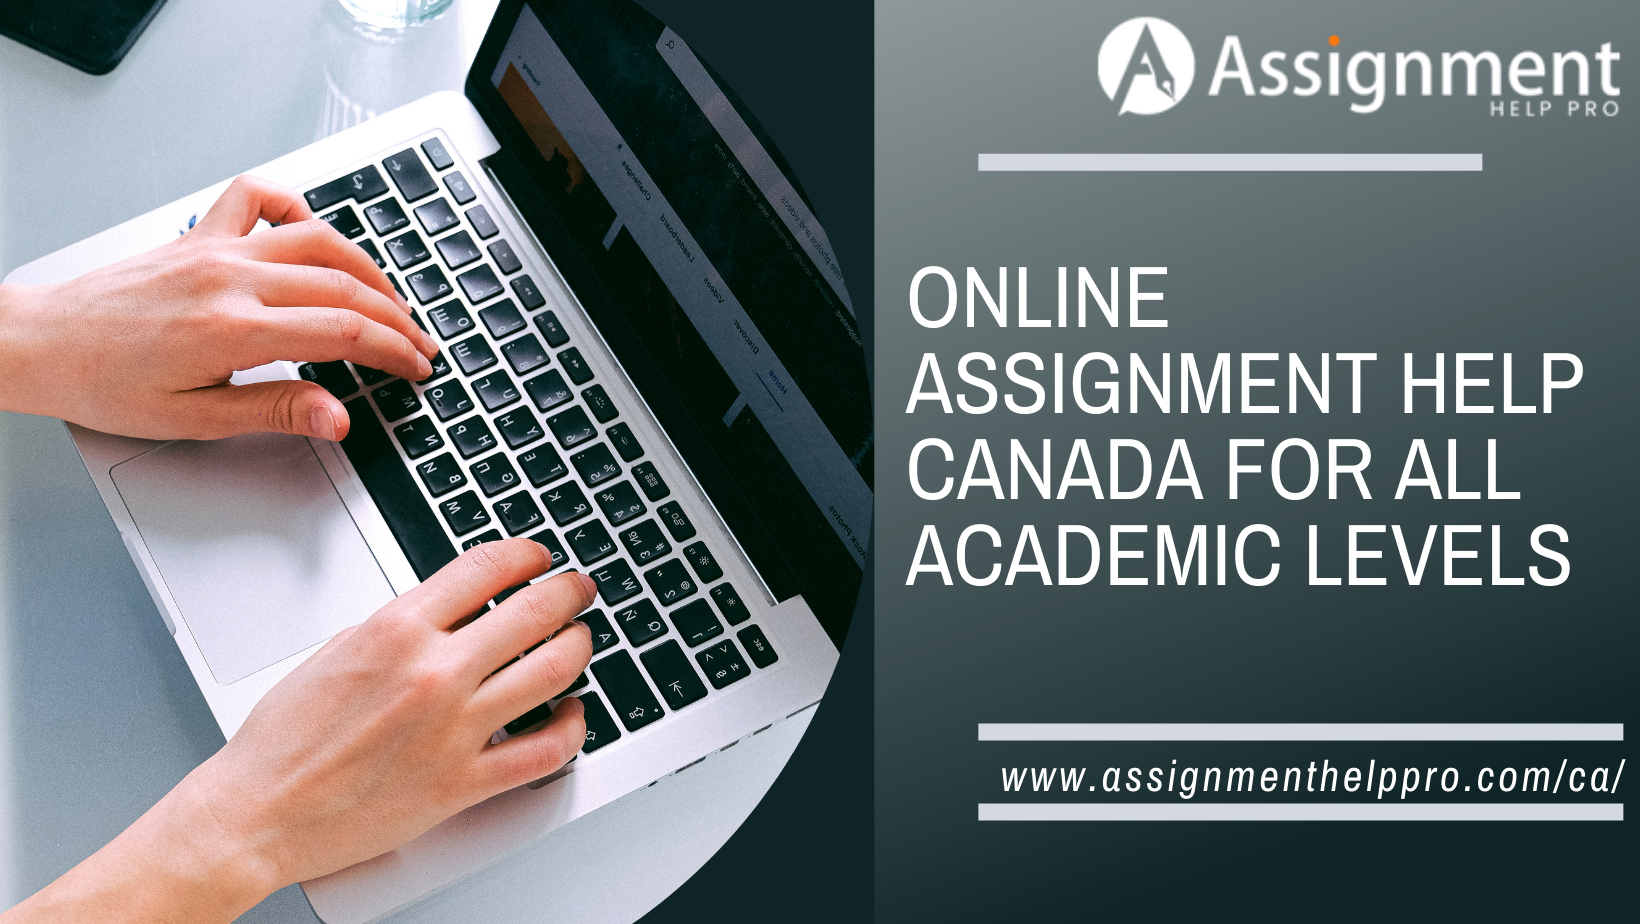 Online Assignment Help Canada for All Academic Levels